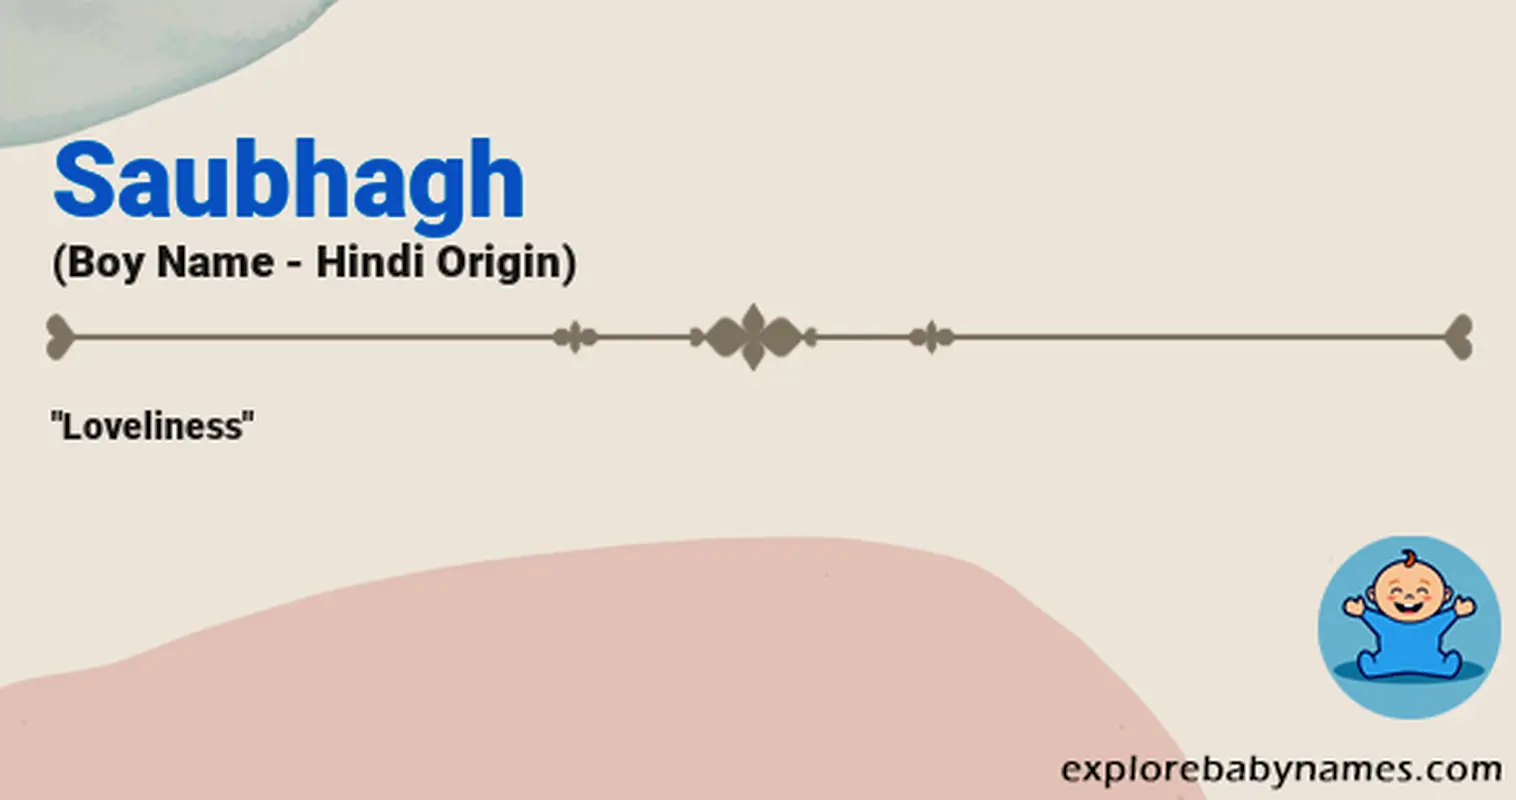 Meaning of Saubhagh